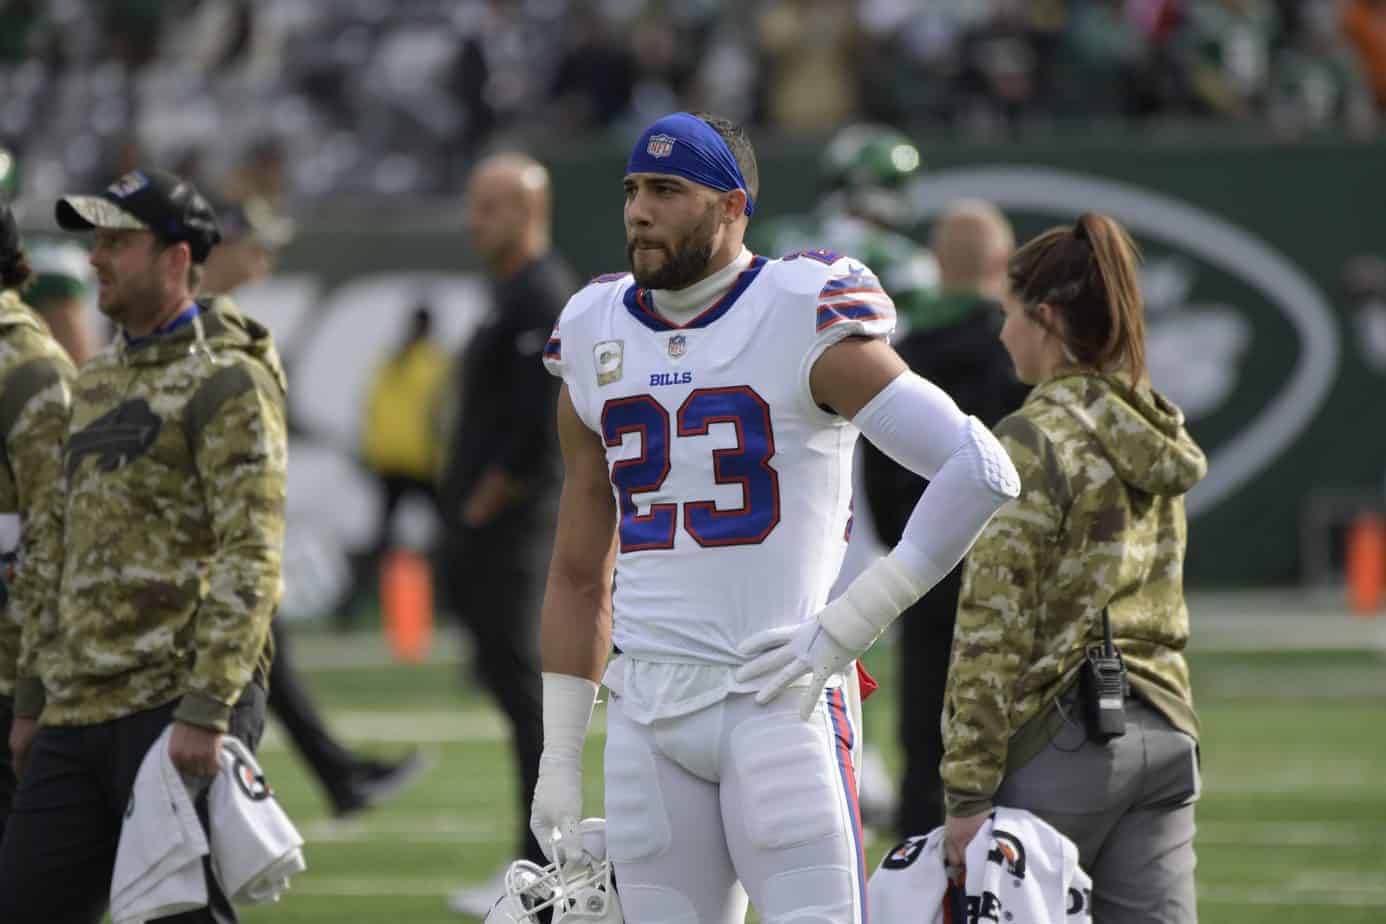 Buffalo Bills safety Micah Hyde explained why he was so upset with a reporter's question following the Monday Night Football loss to the Patriots